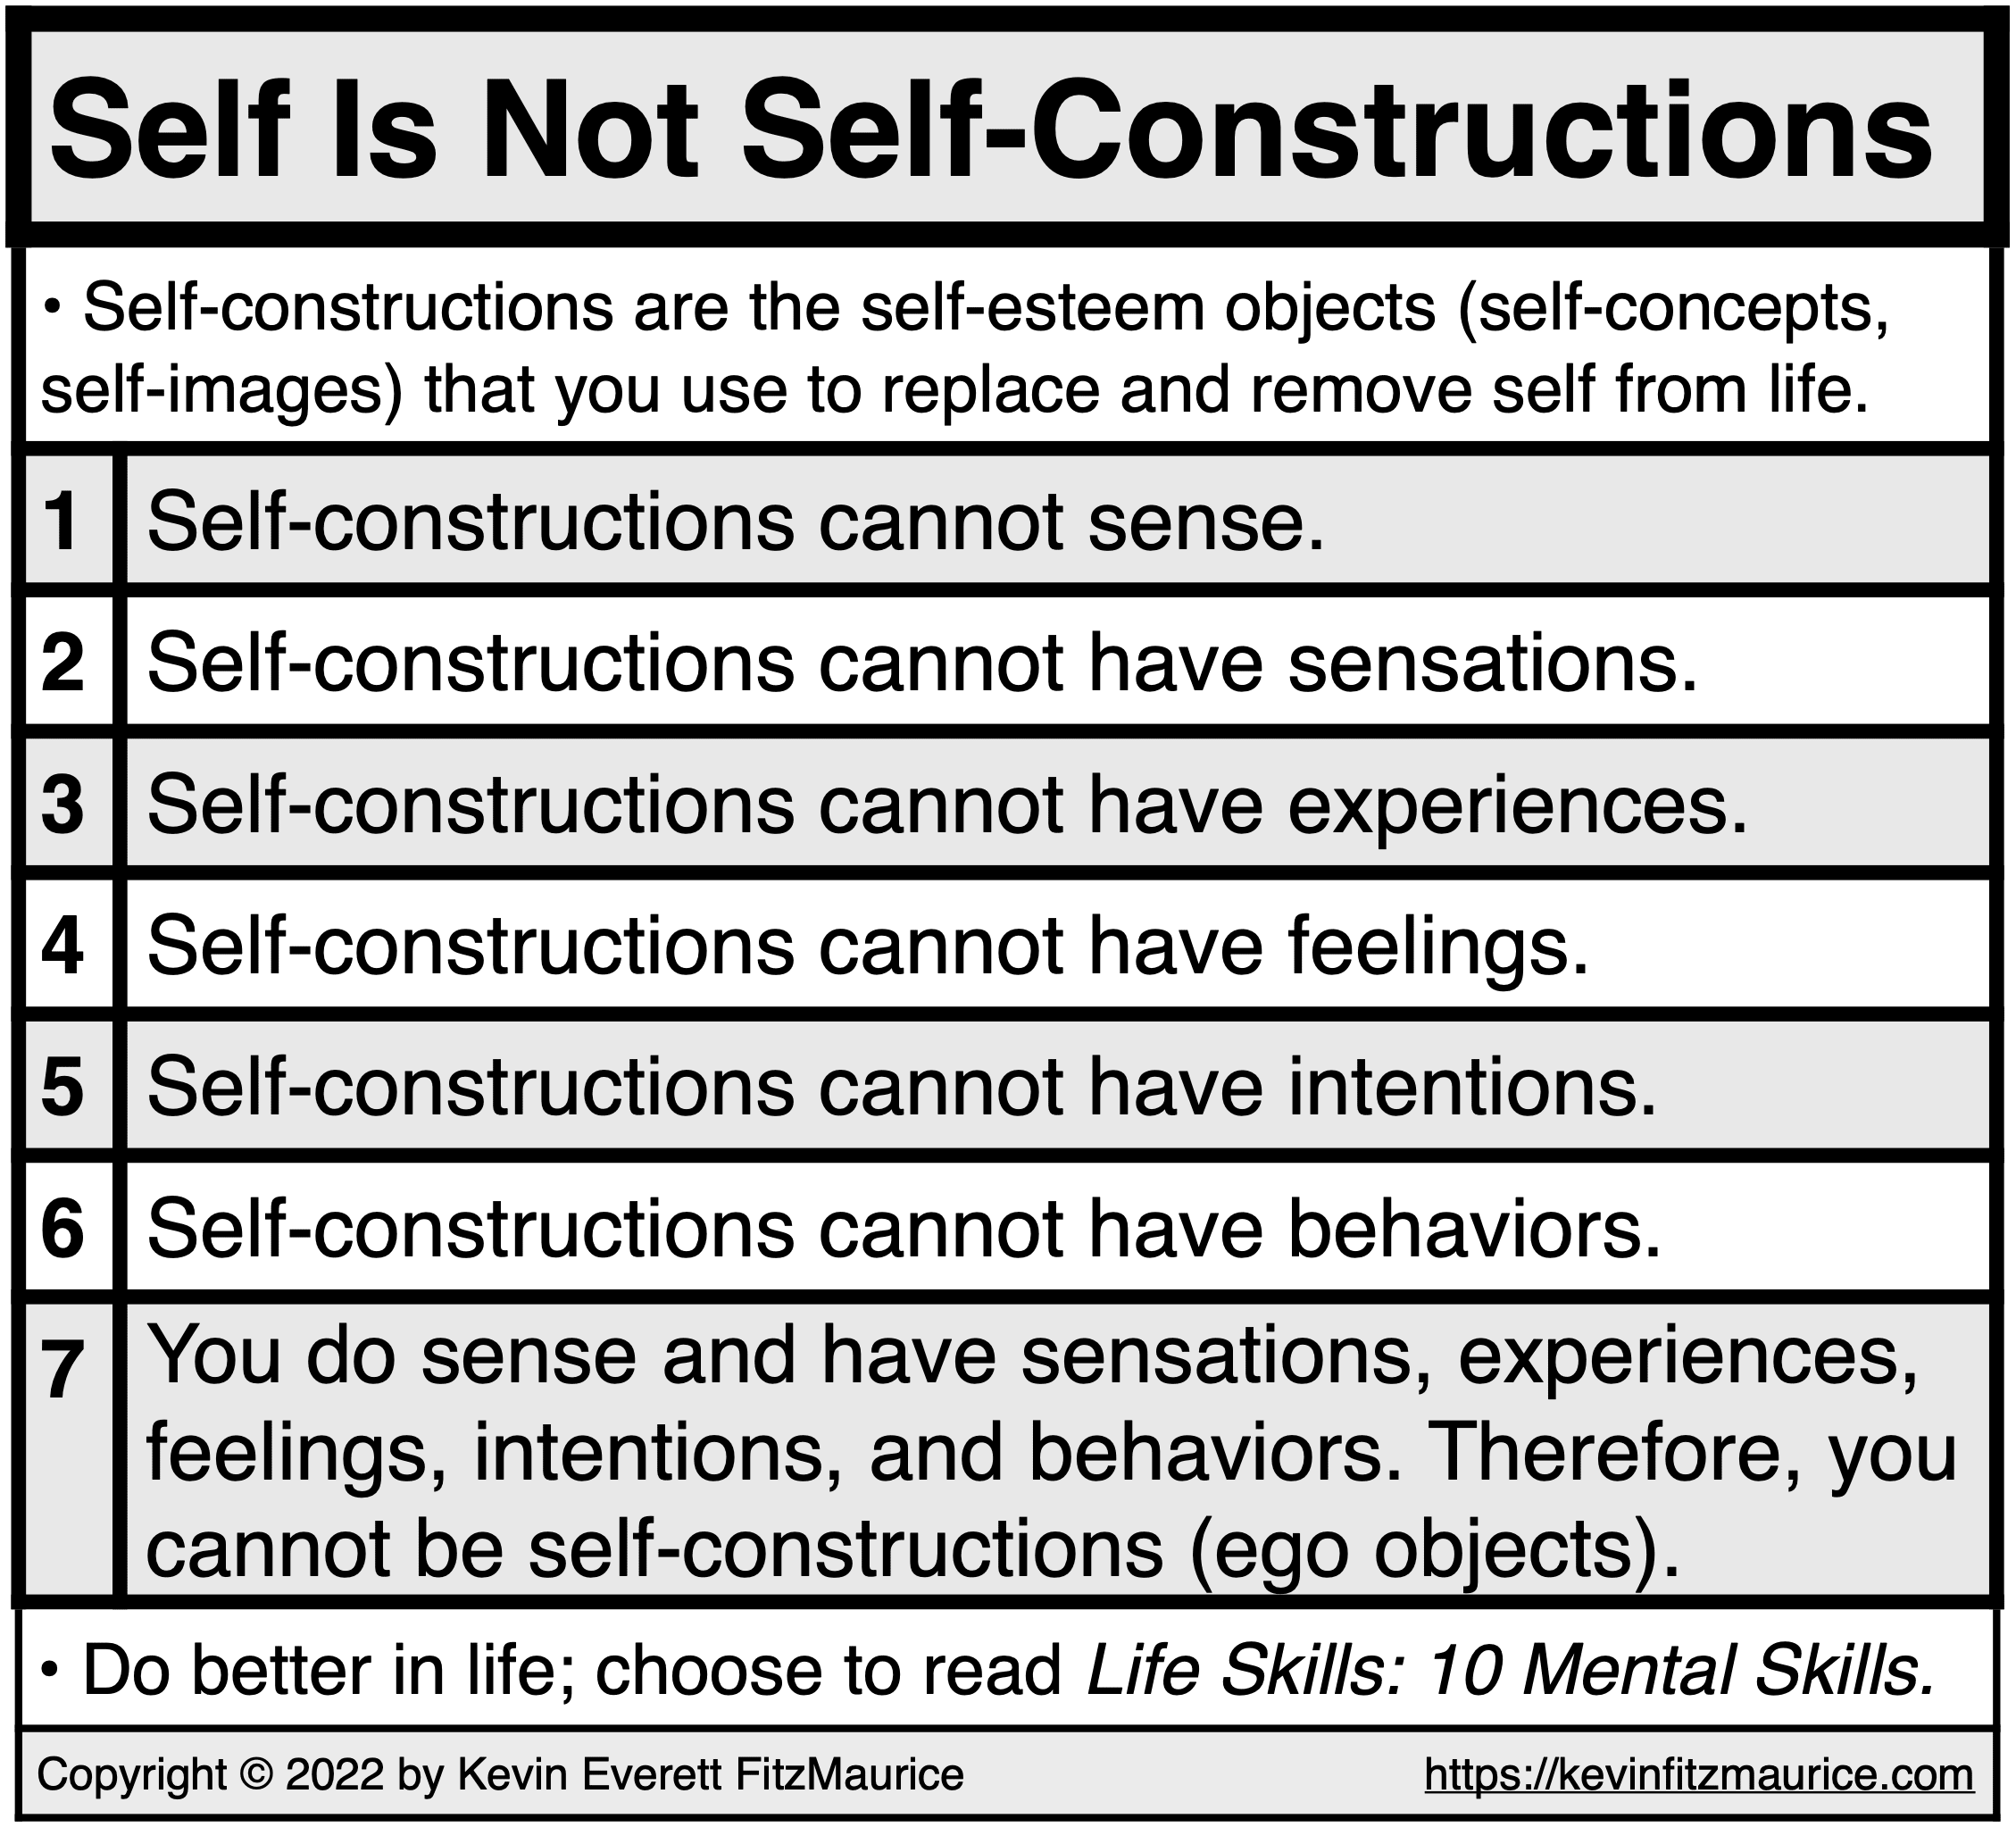 You are not self-constructions.